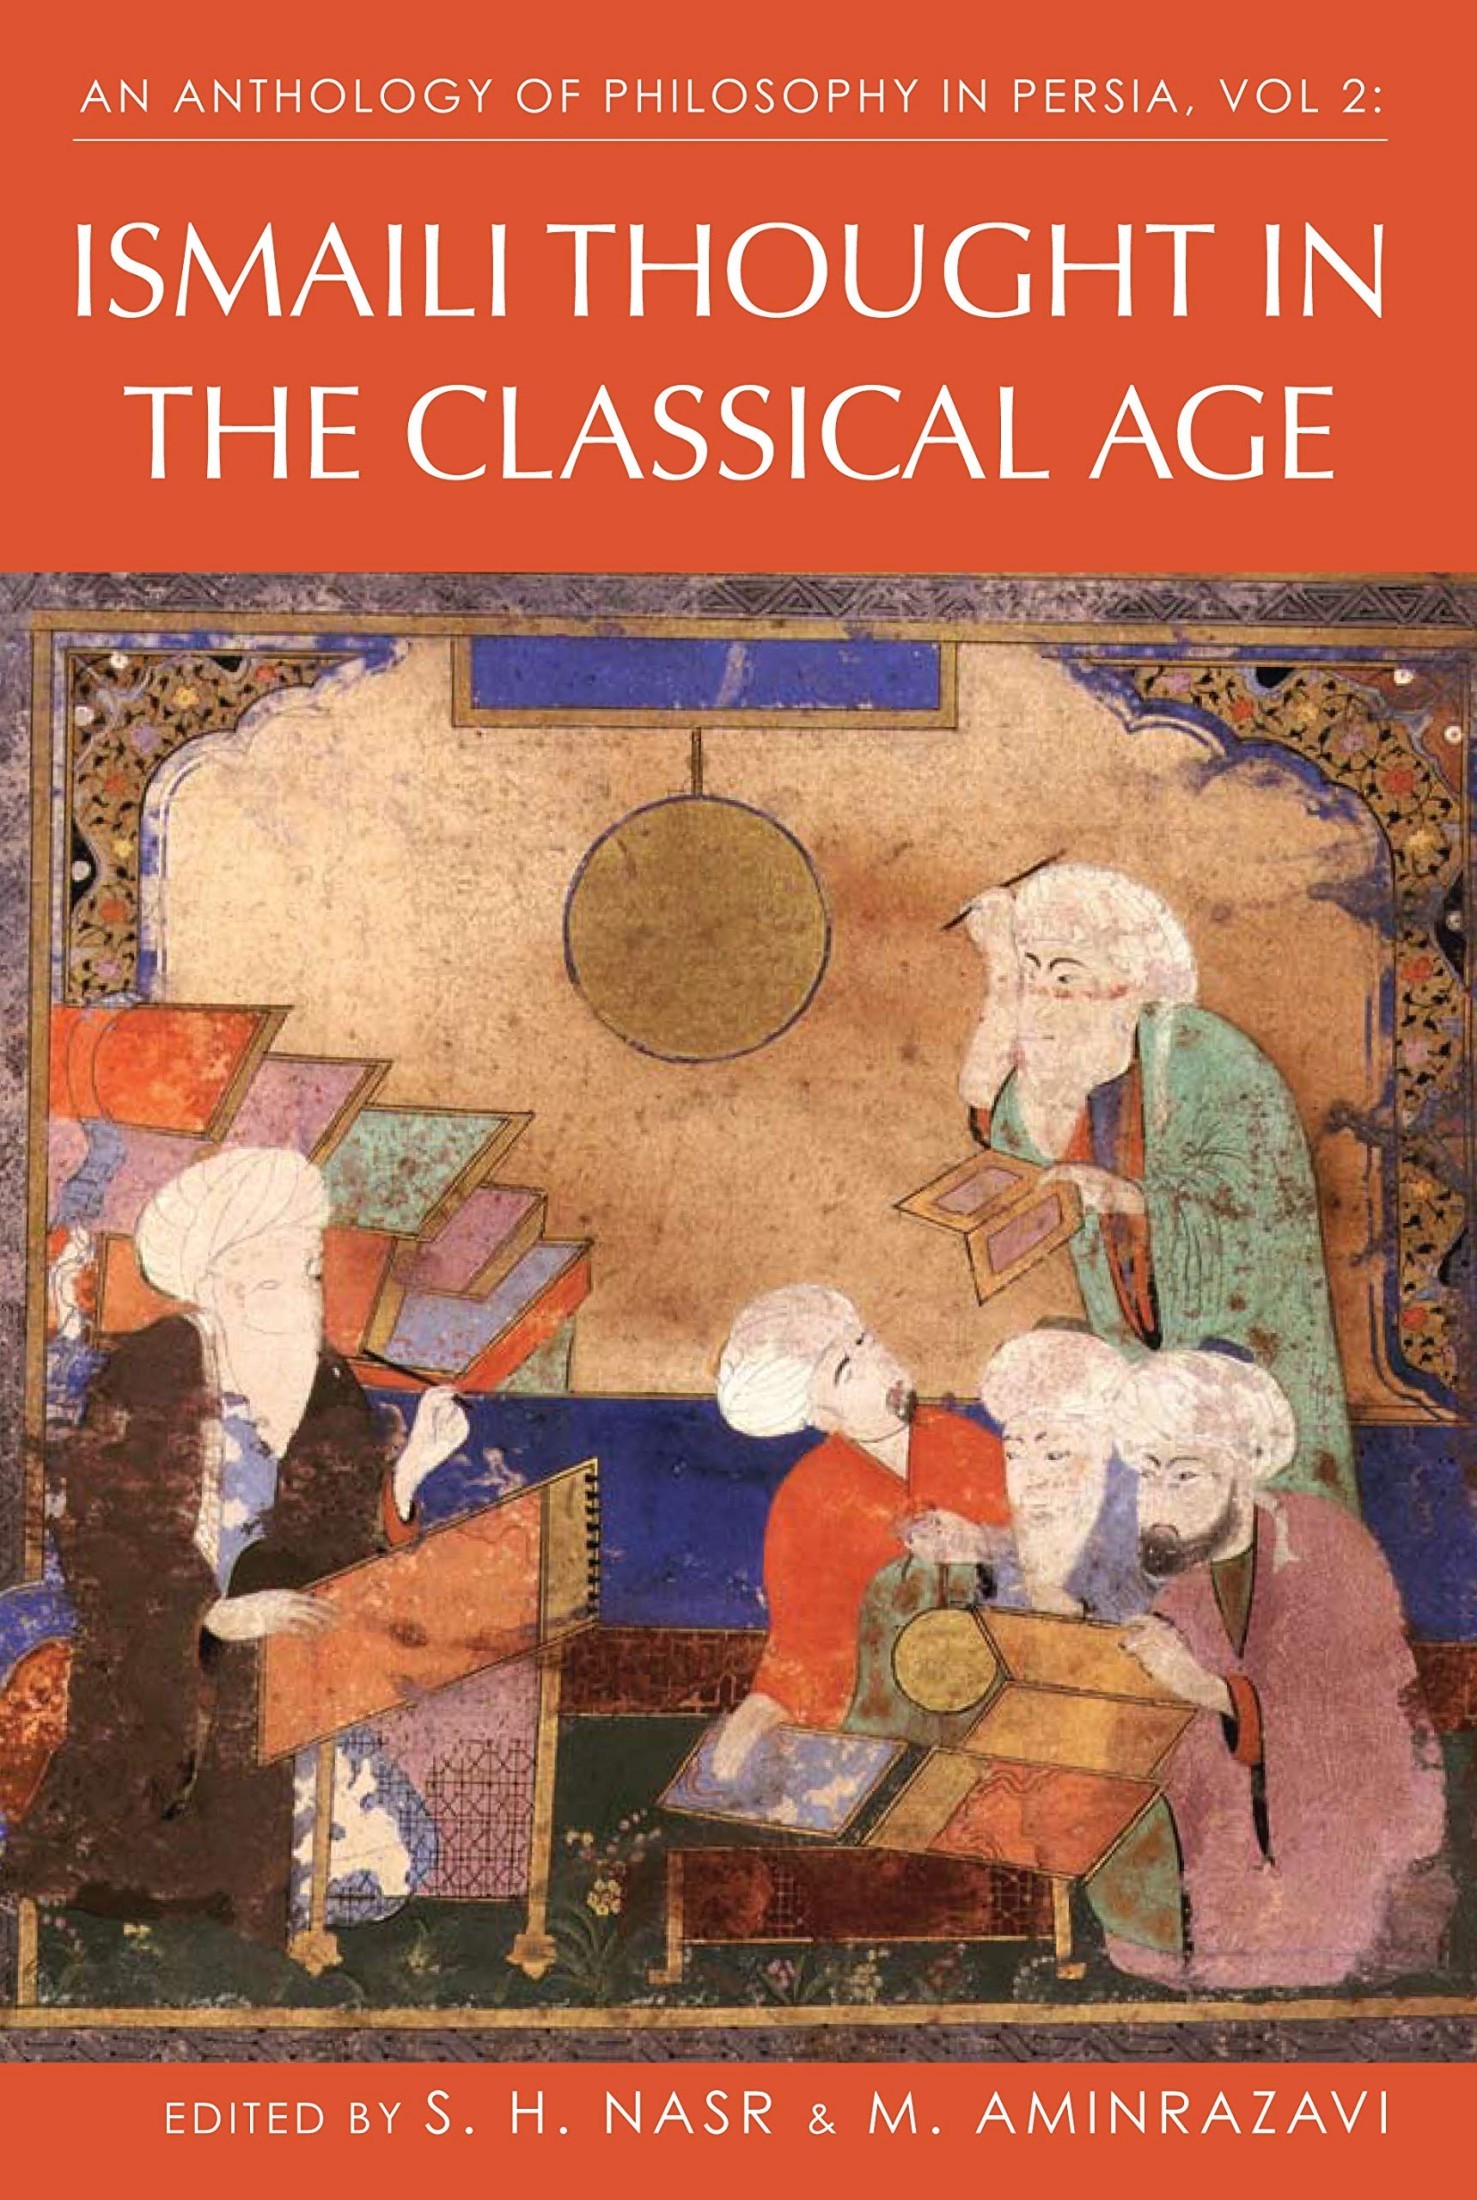 An Anthology of Philosophy in Persia, Vol. 2: Ismaili Thought in the Classical Age